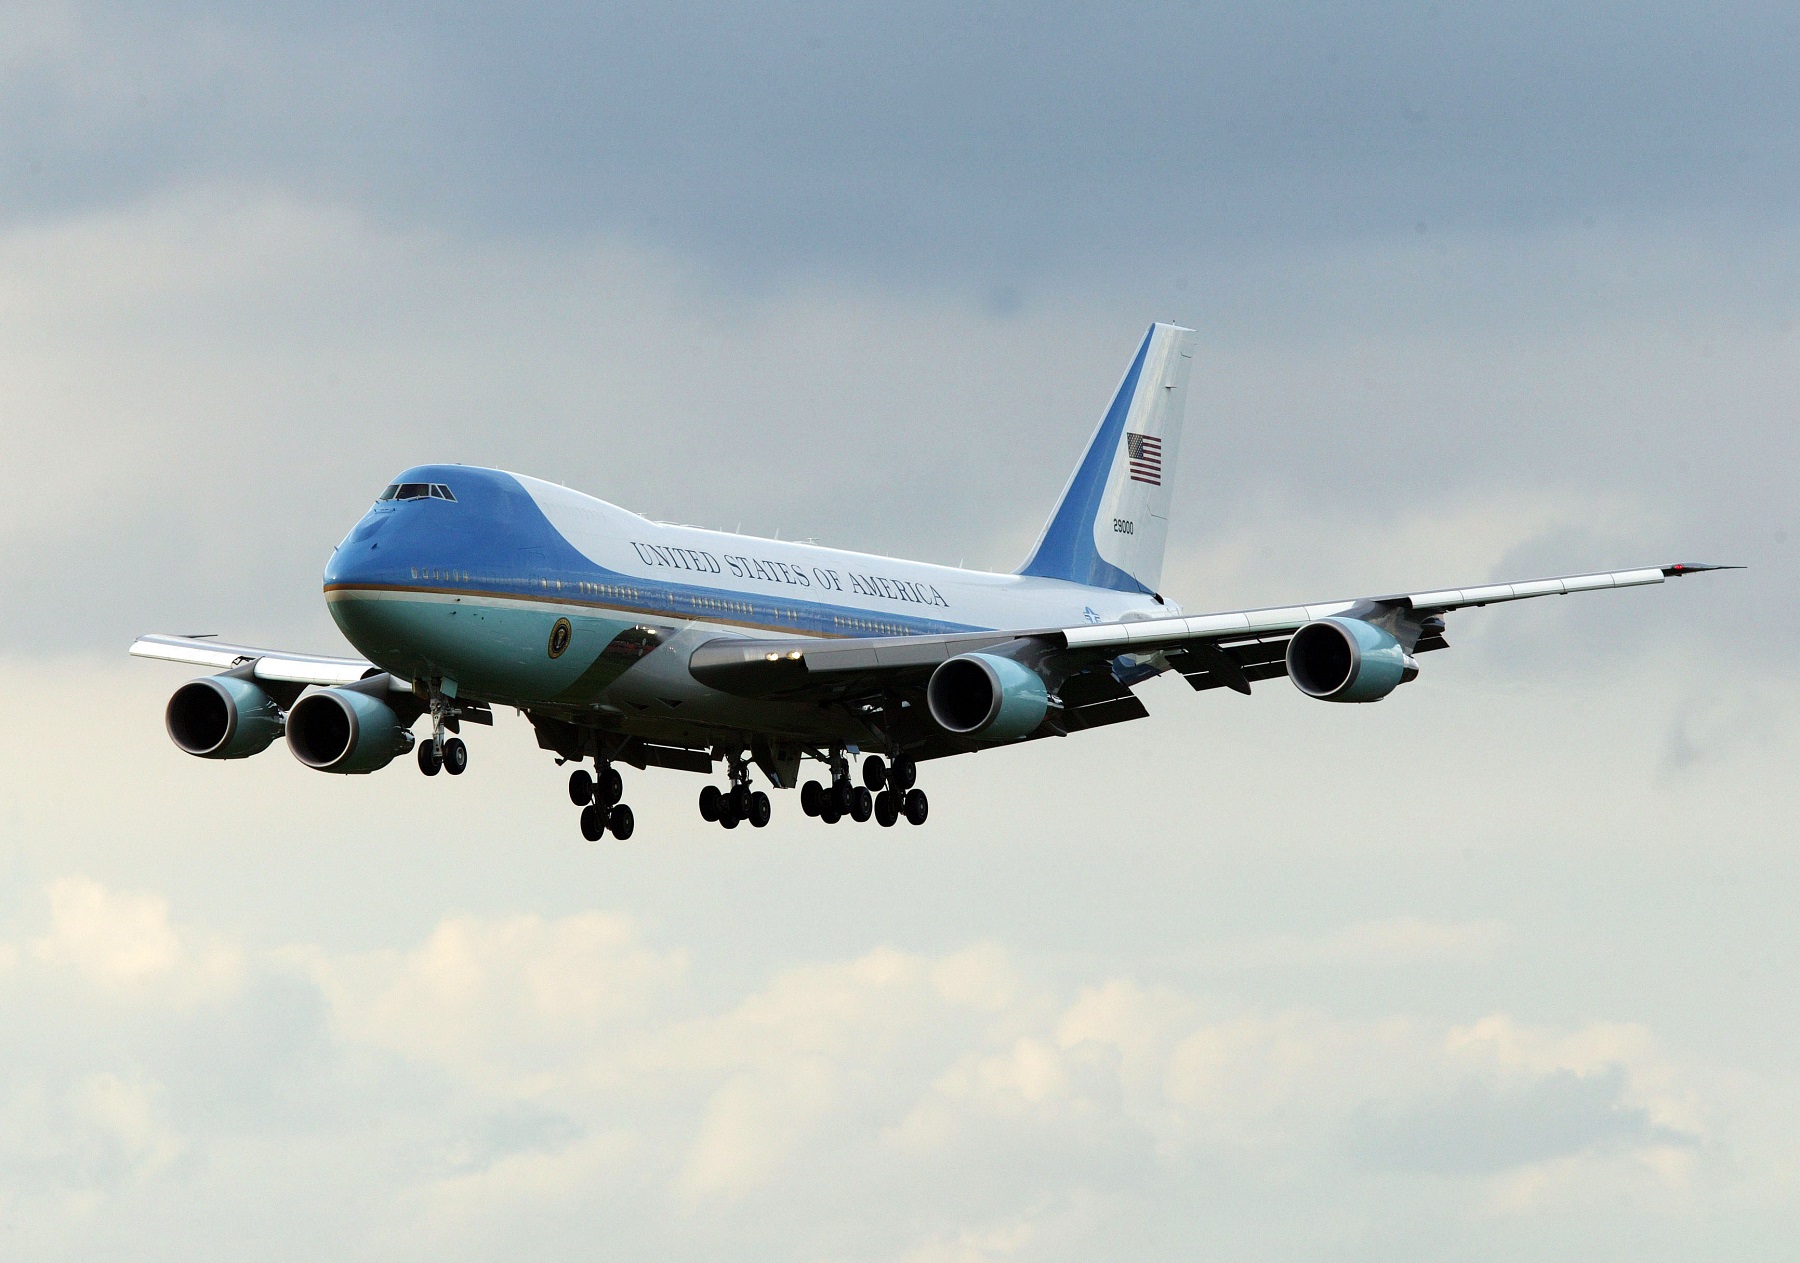 MAASTRICHT, NETHERLANDS - MAY 7:  Air Force one carrying U.S. President George W. Bush makes its approach to Maastricht Airport May 7, 2005 in Maastricht, the Netherlands. Bush will visit the U.S. war cemetery in Margraven and meet with Dutch Prime Minister Jan Peter Balkenende.  (Photo by Michel Porro/Getty Images)